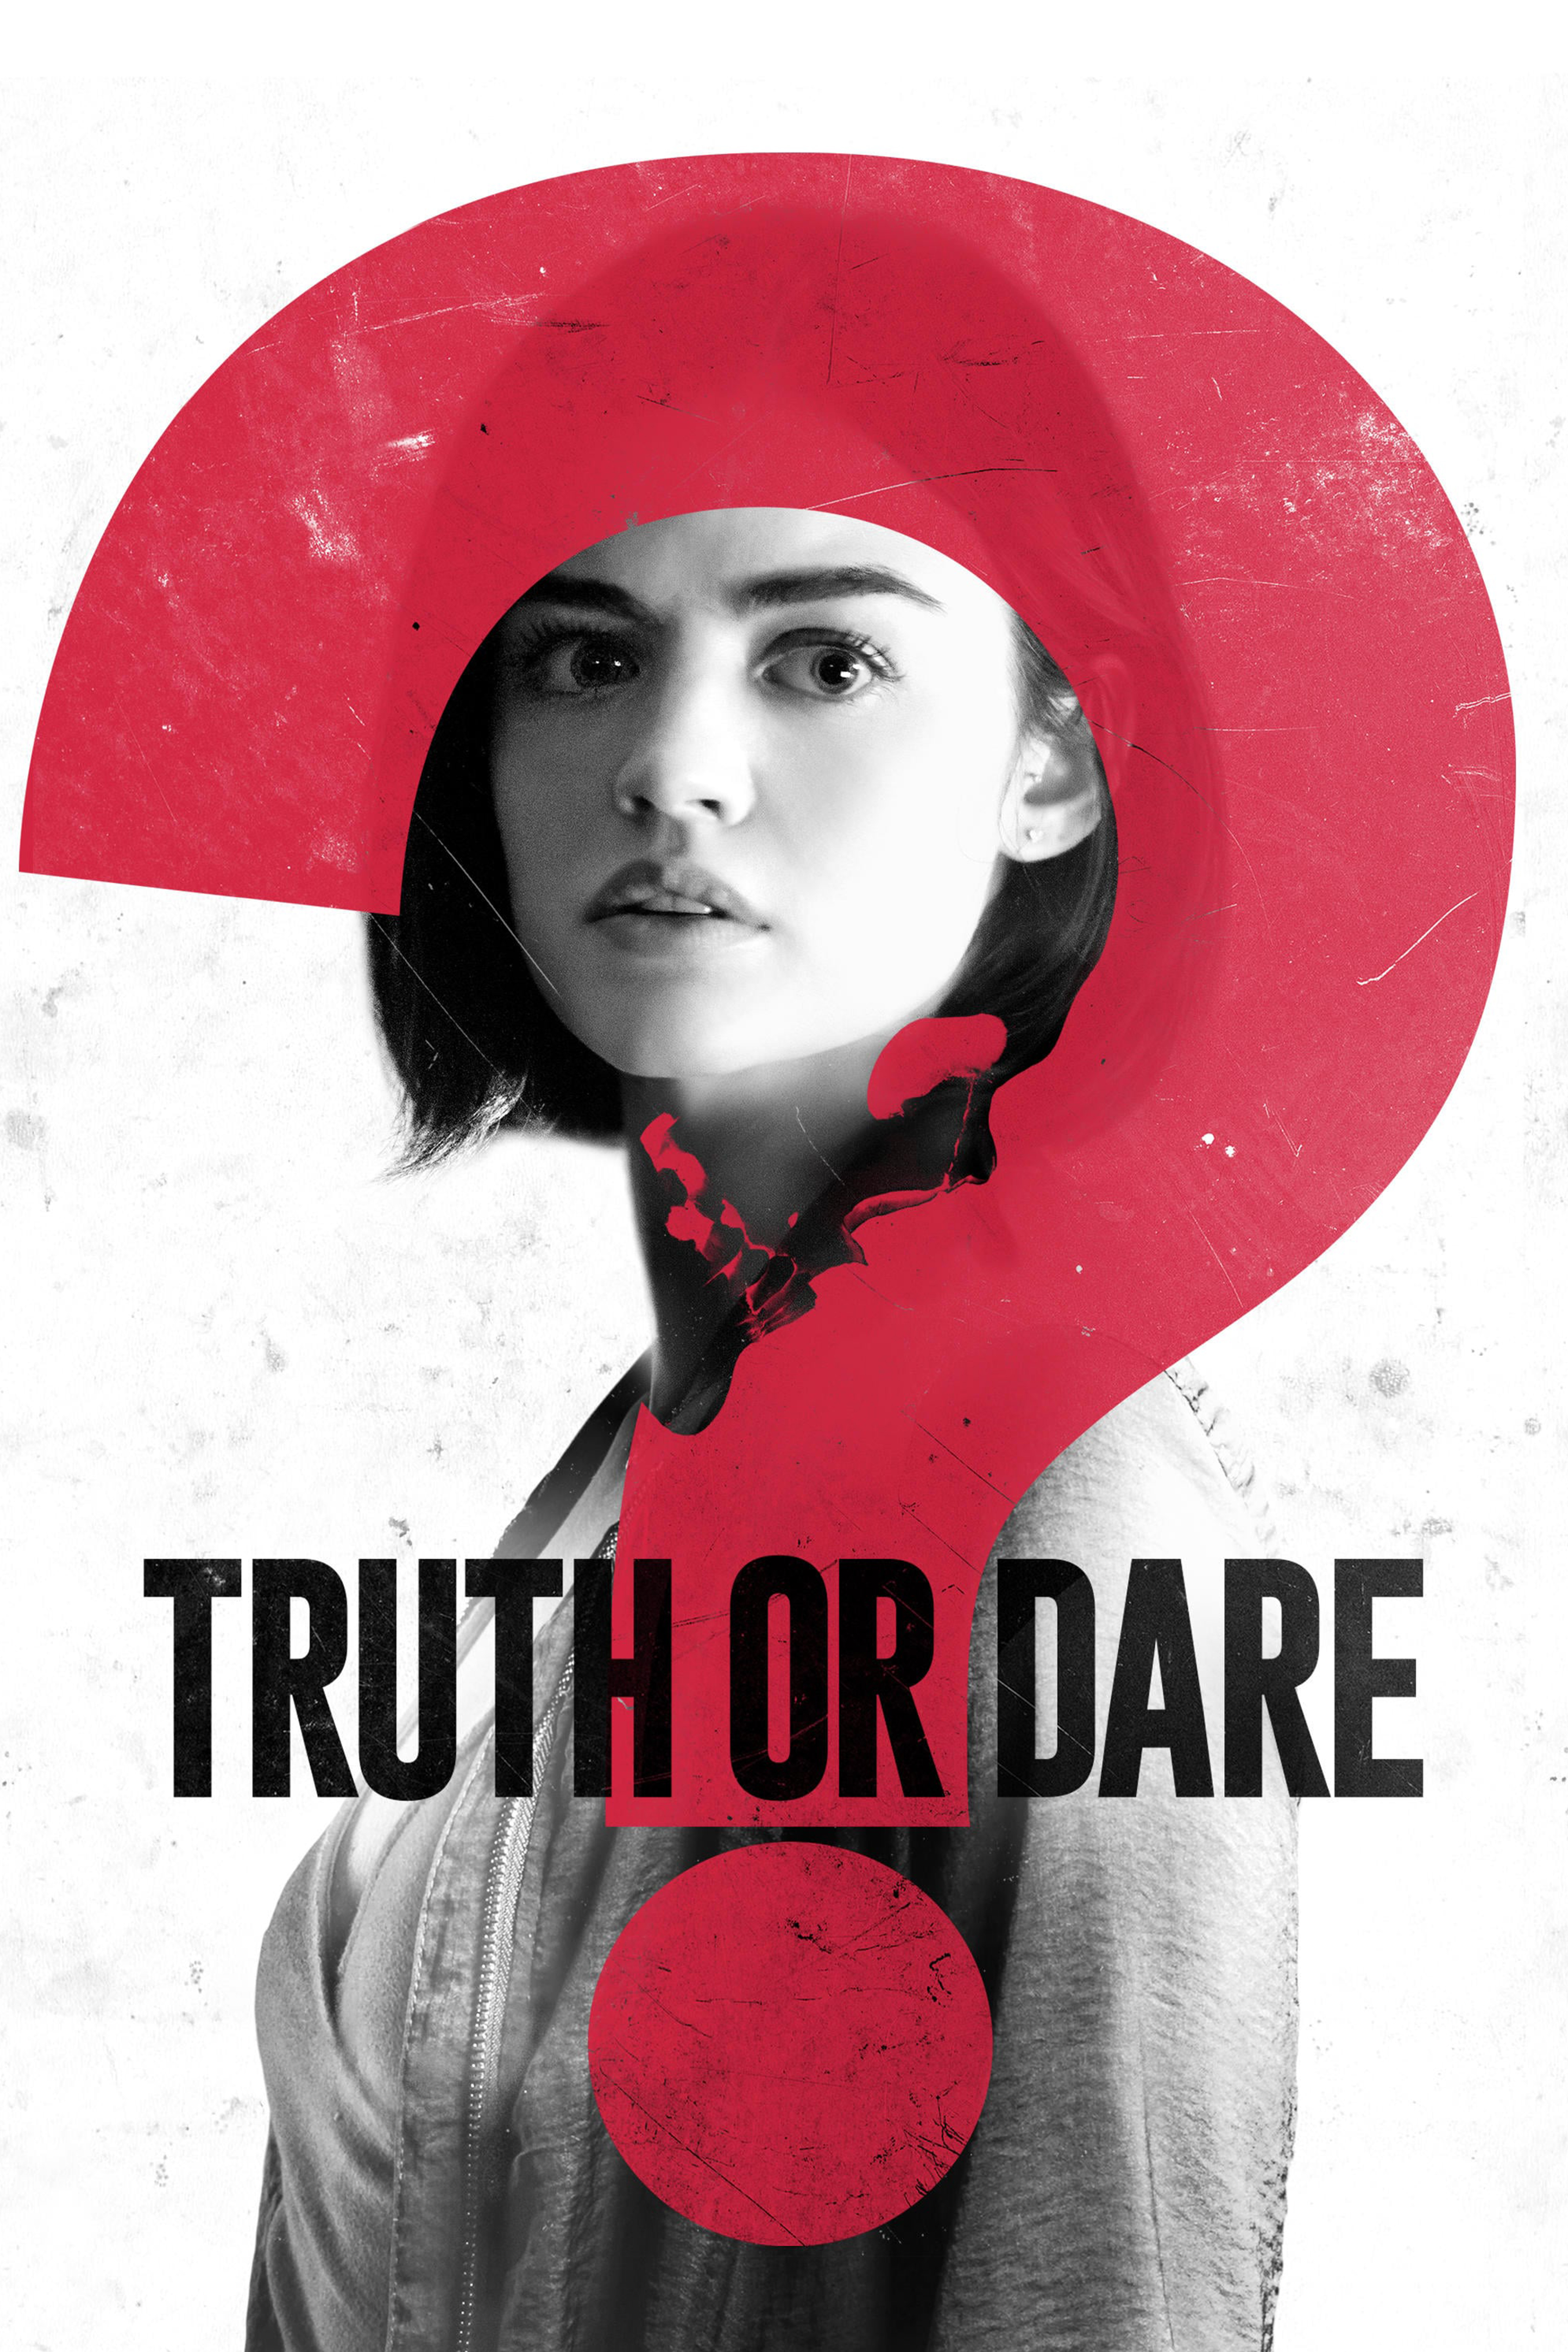 Truth or Dare Images. 